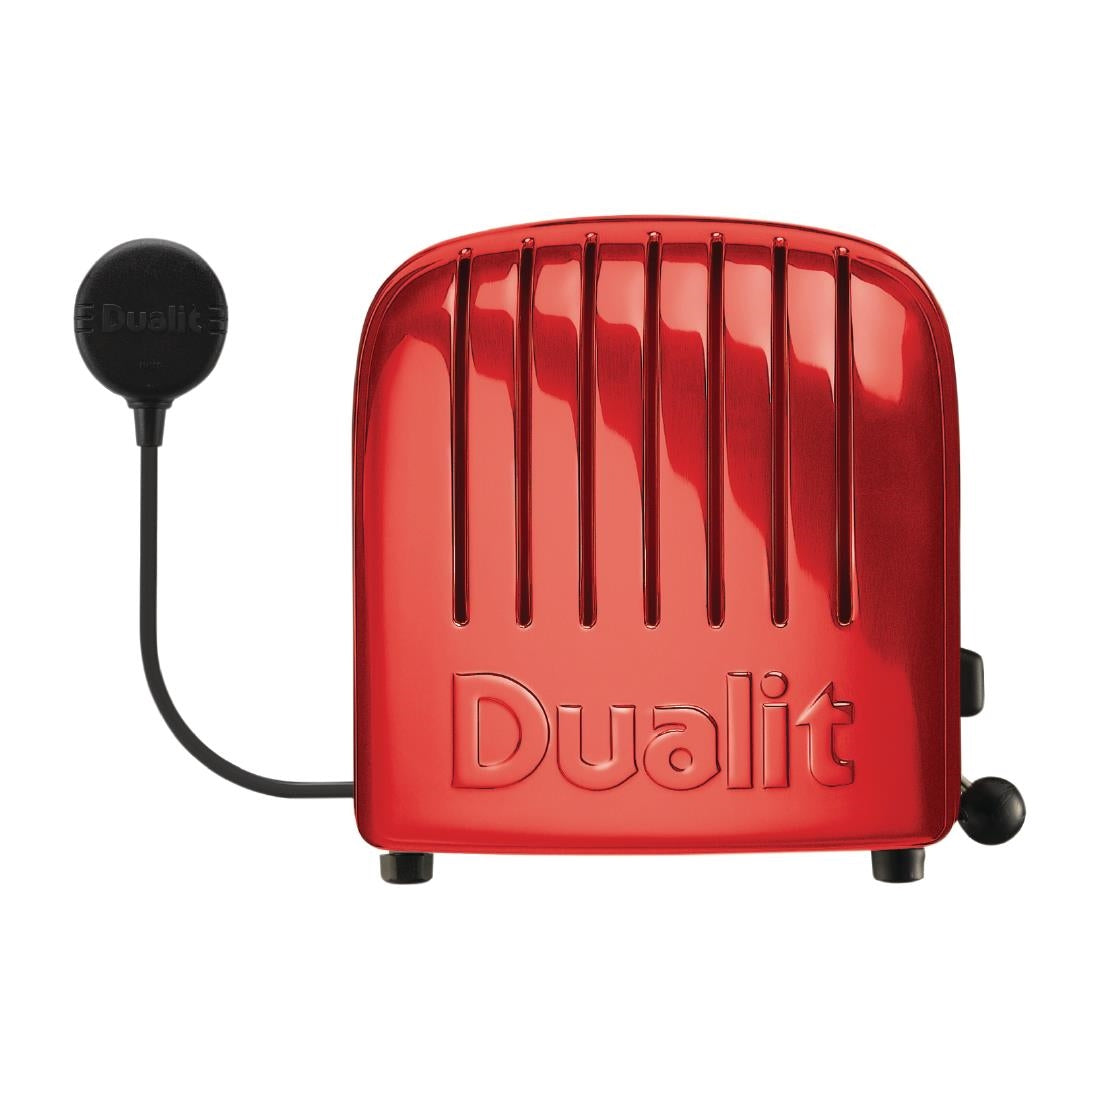 Dualit 3 Slice Vario Toaster Red 30085 JD Catering Equipment Solutions Ltd